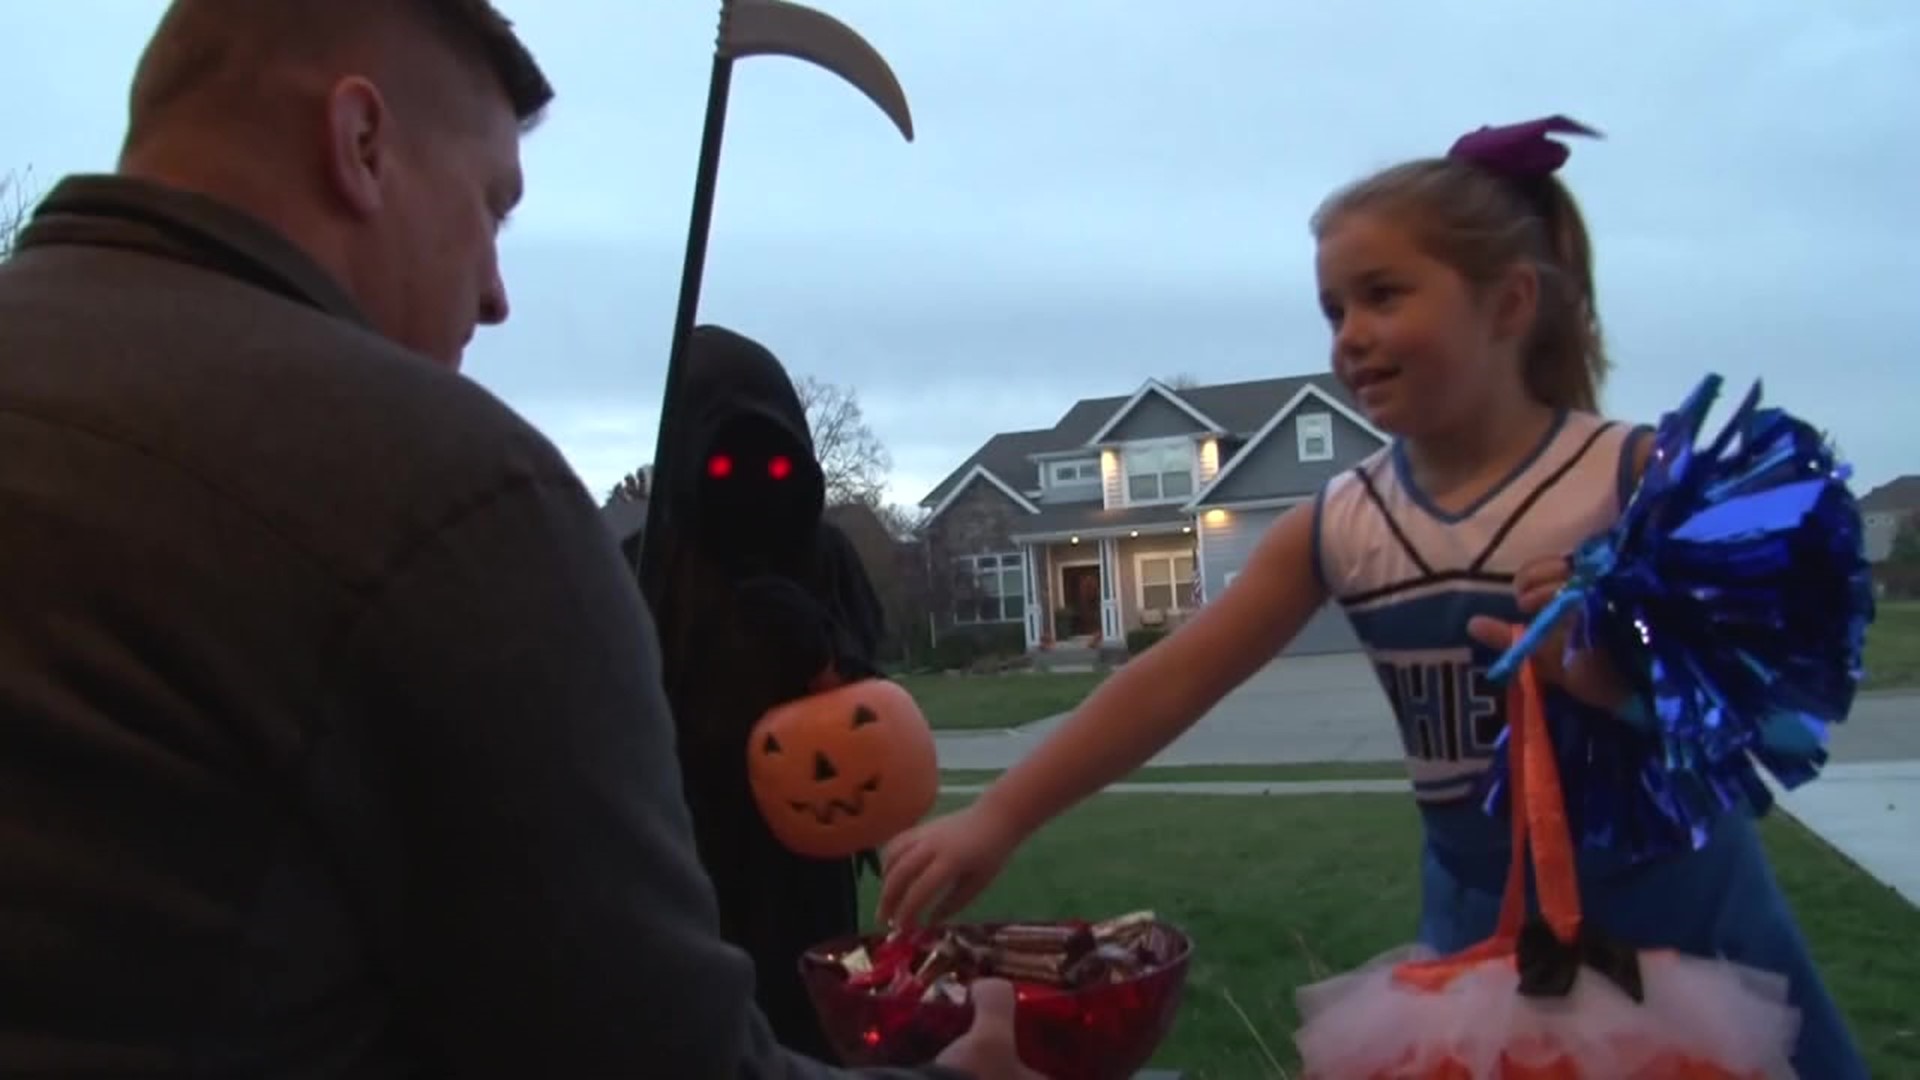 State police want to make sure Halloween is a fun but safe time for everyone.